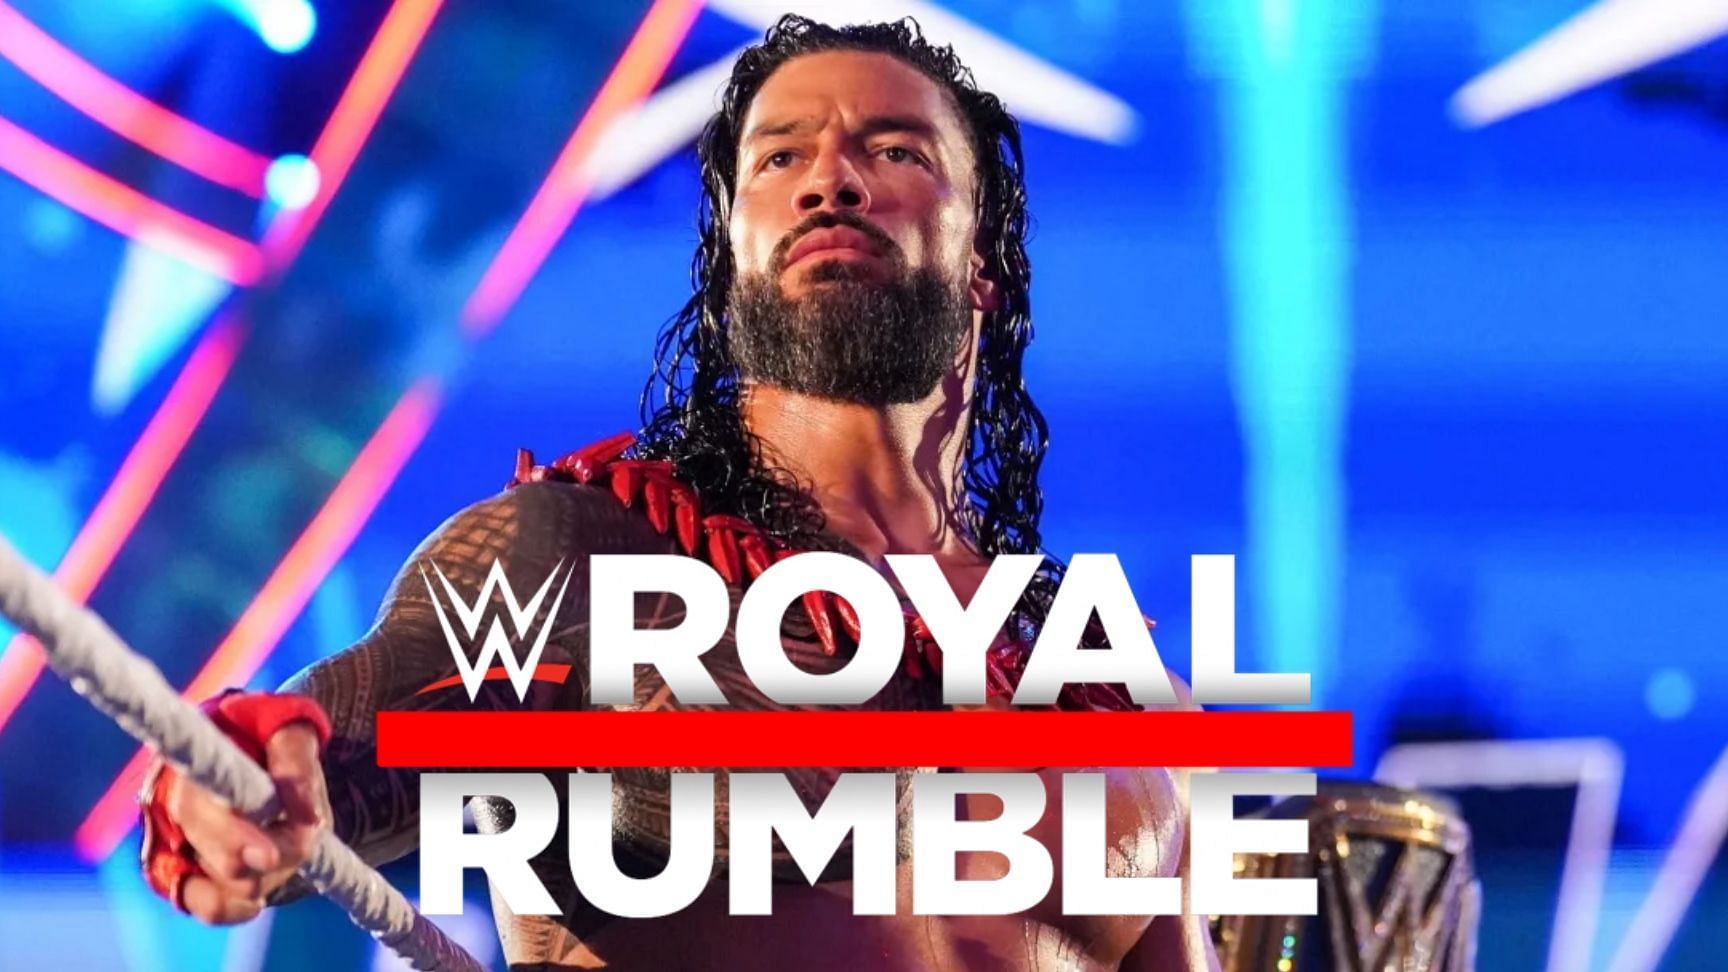 Roman Reigns will face Kevin Owens at the Royal Rumble.